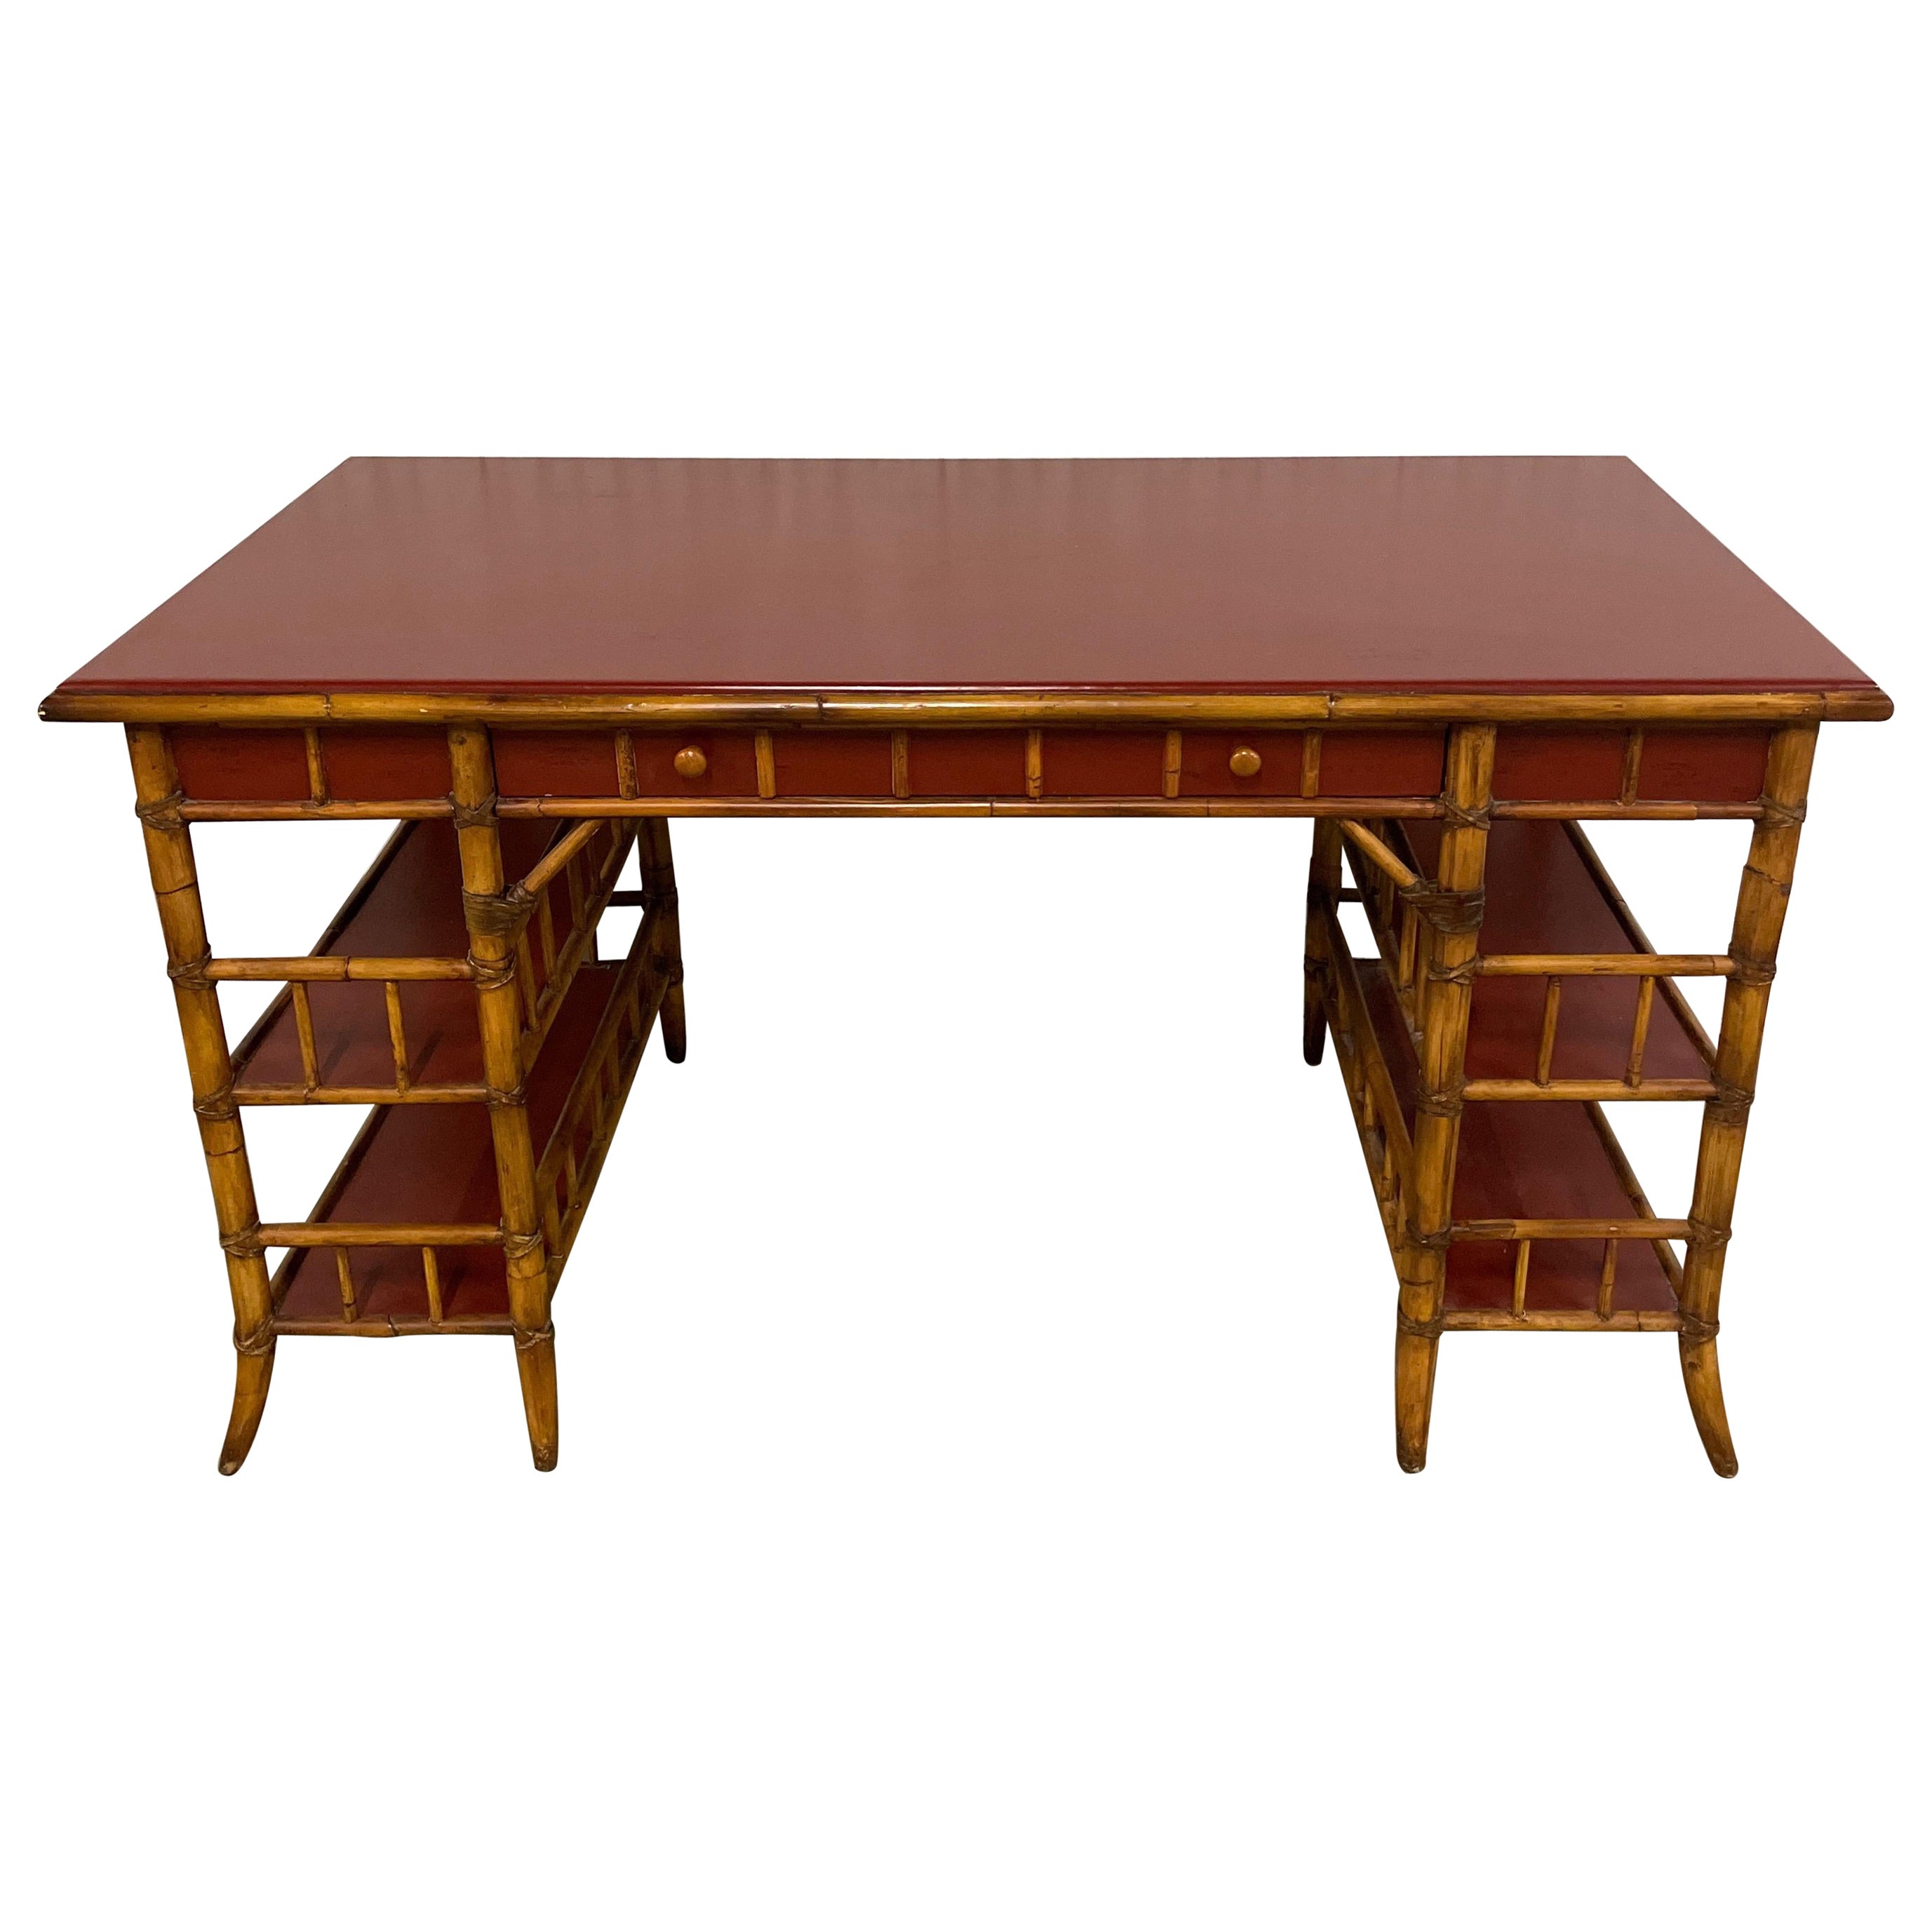 Vintage Bamboo Desk with Red Lacquer Top by Baker